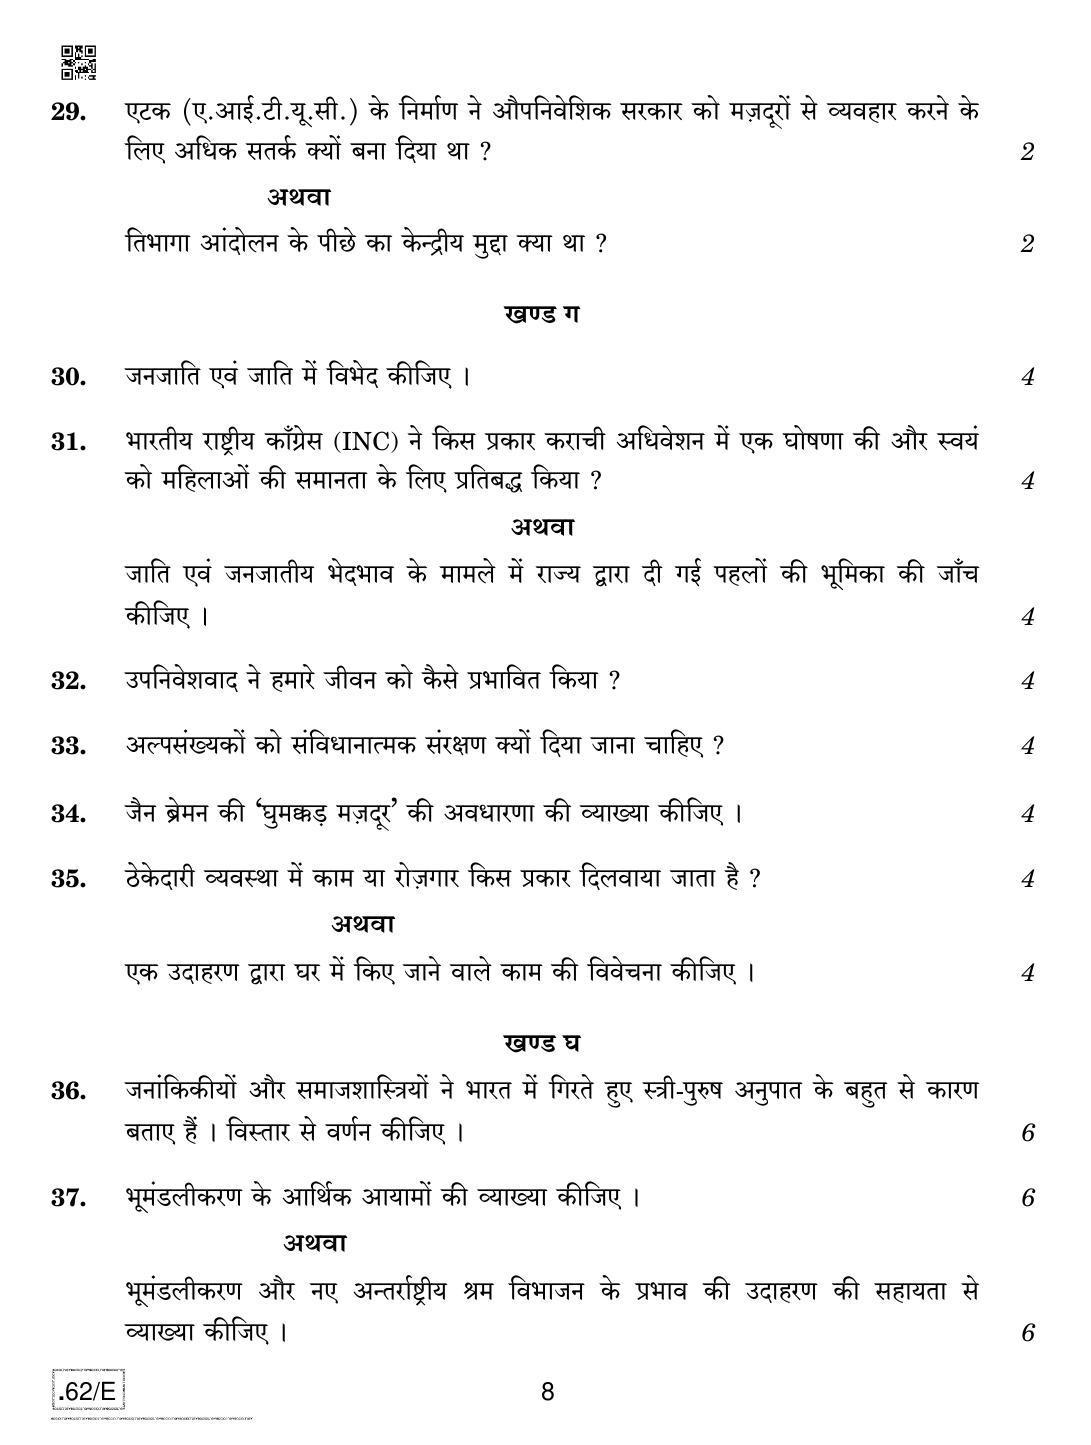 CBSE Class 12 Sociology 2020 Compartment Question Paper - Page 8